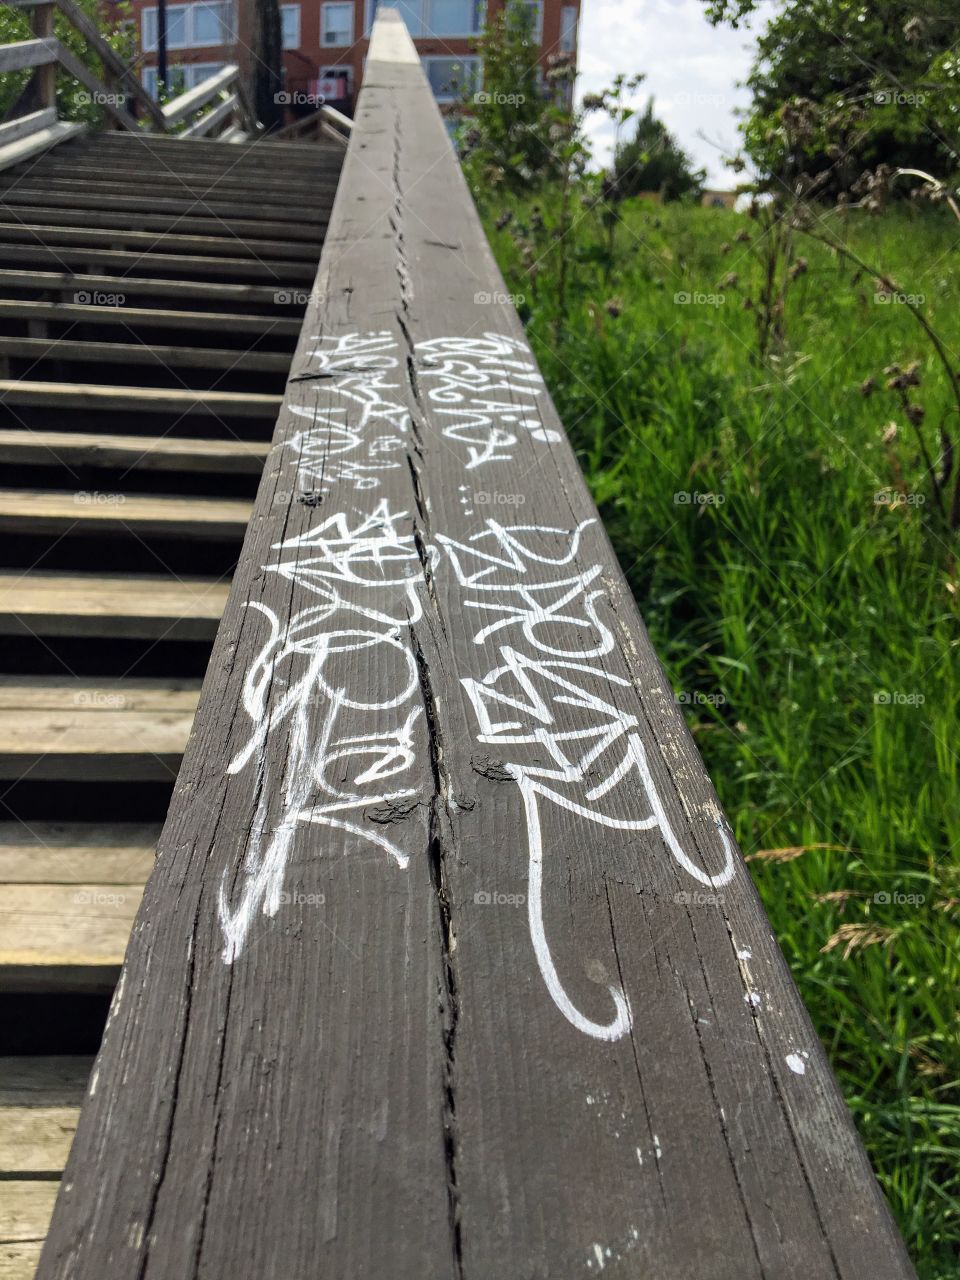 Graffiti on a wooden staircase 